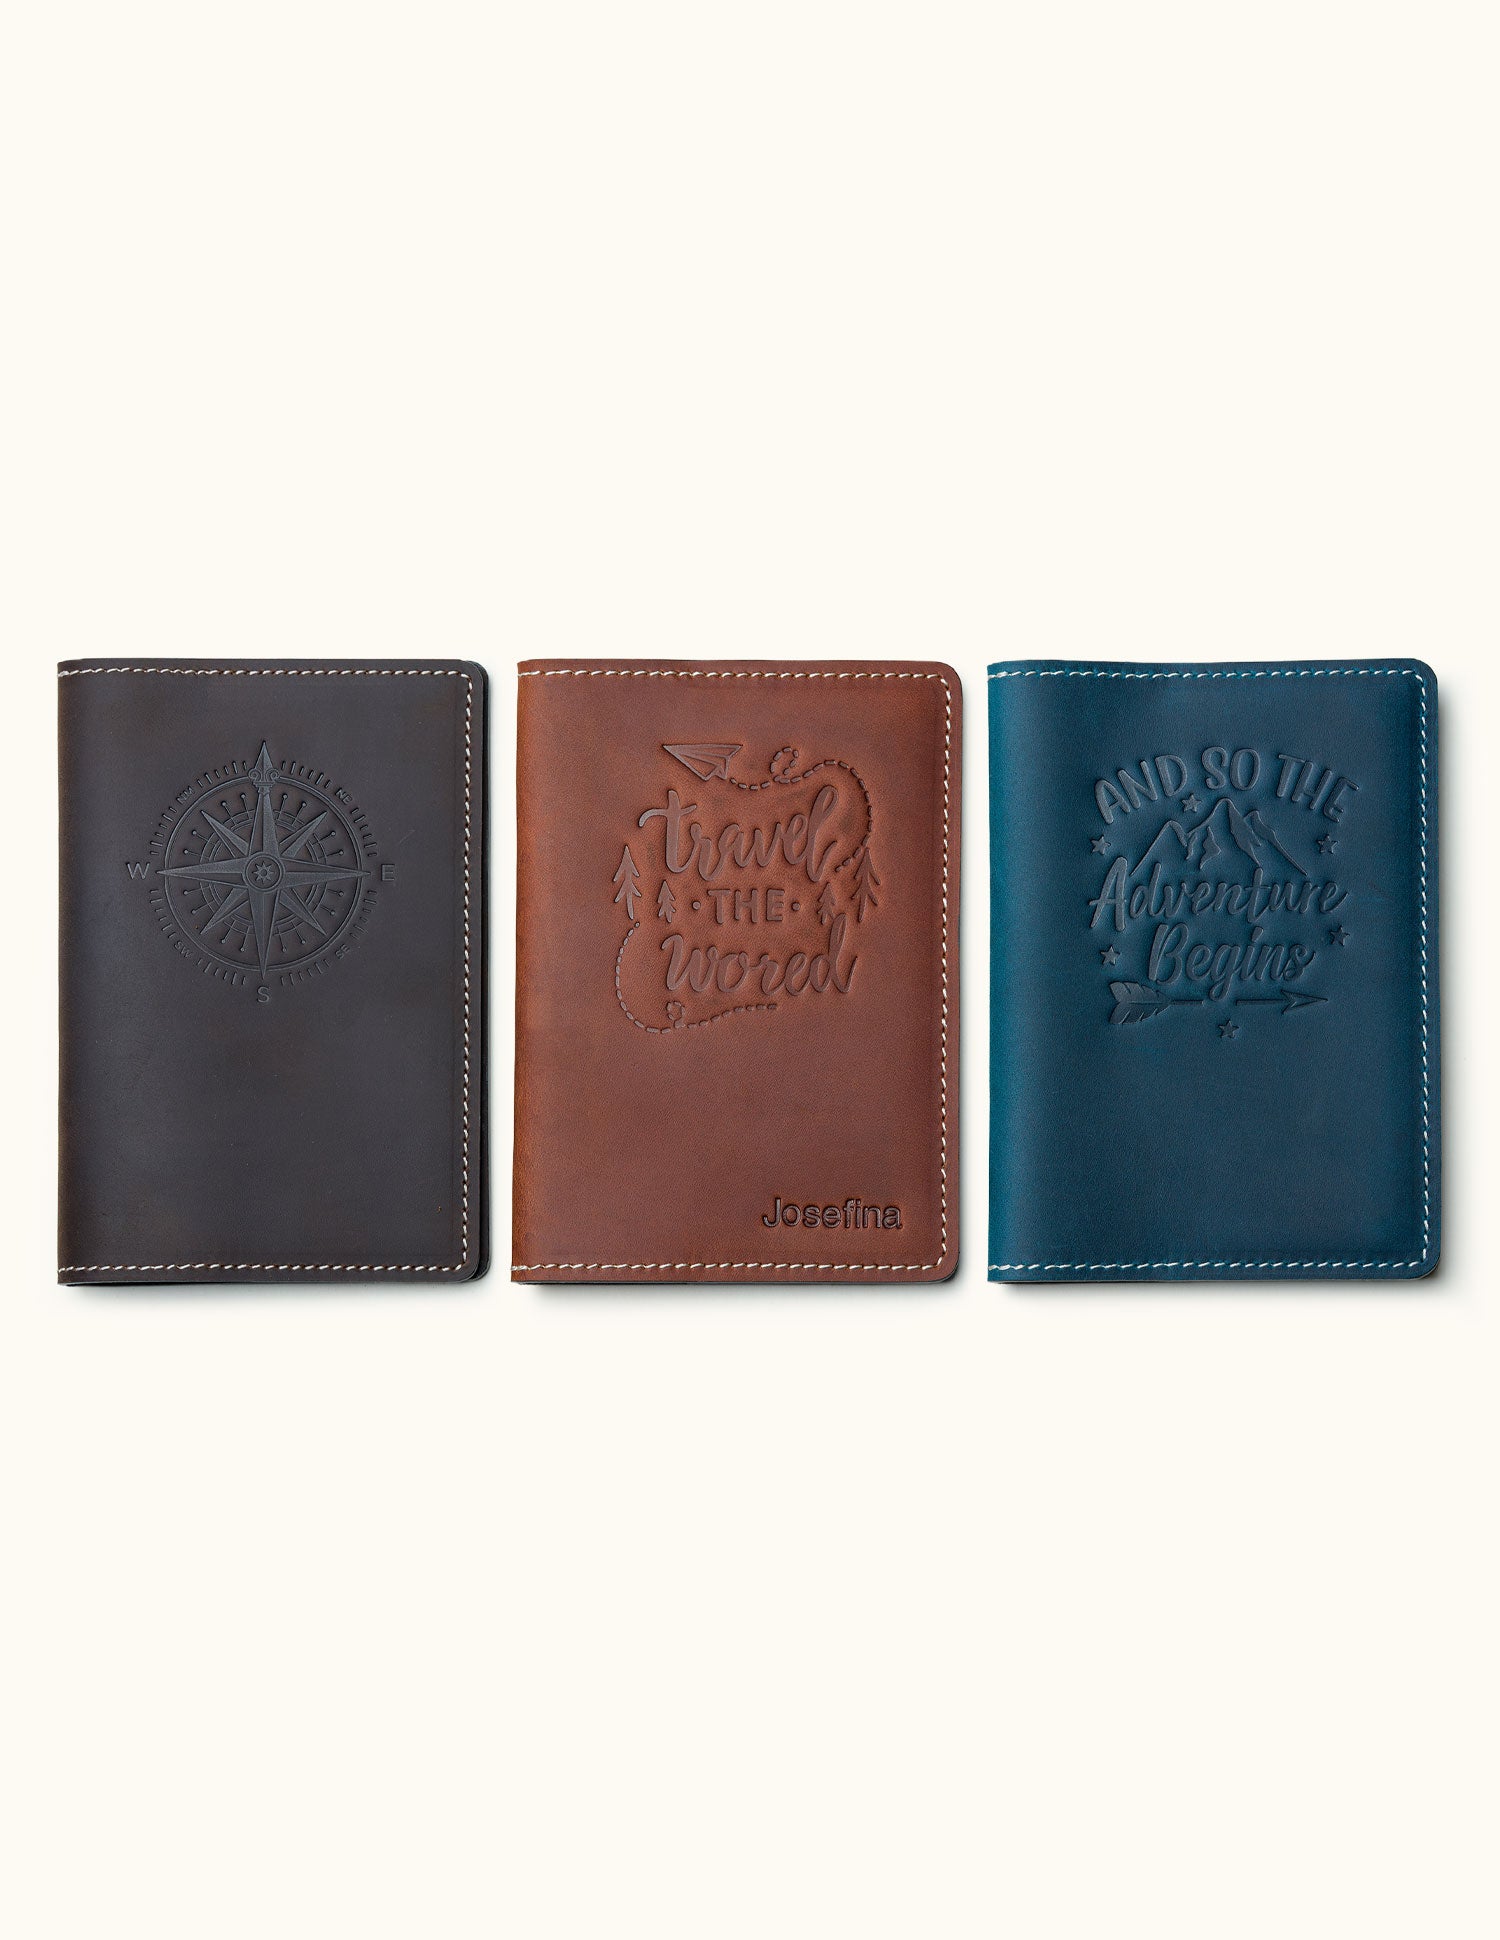 Custom Leather Passport Holder Personalized for Travel | CraftedMan ...